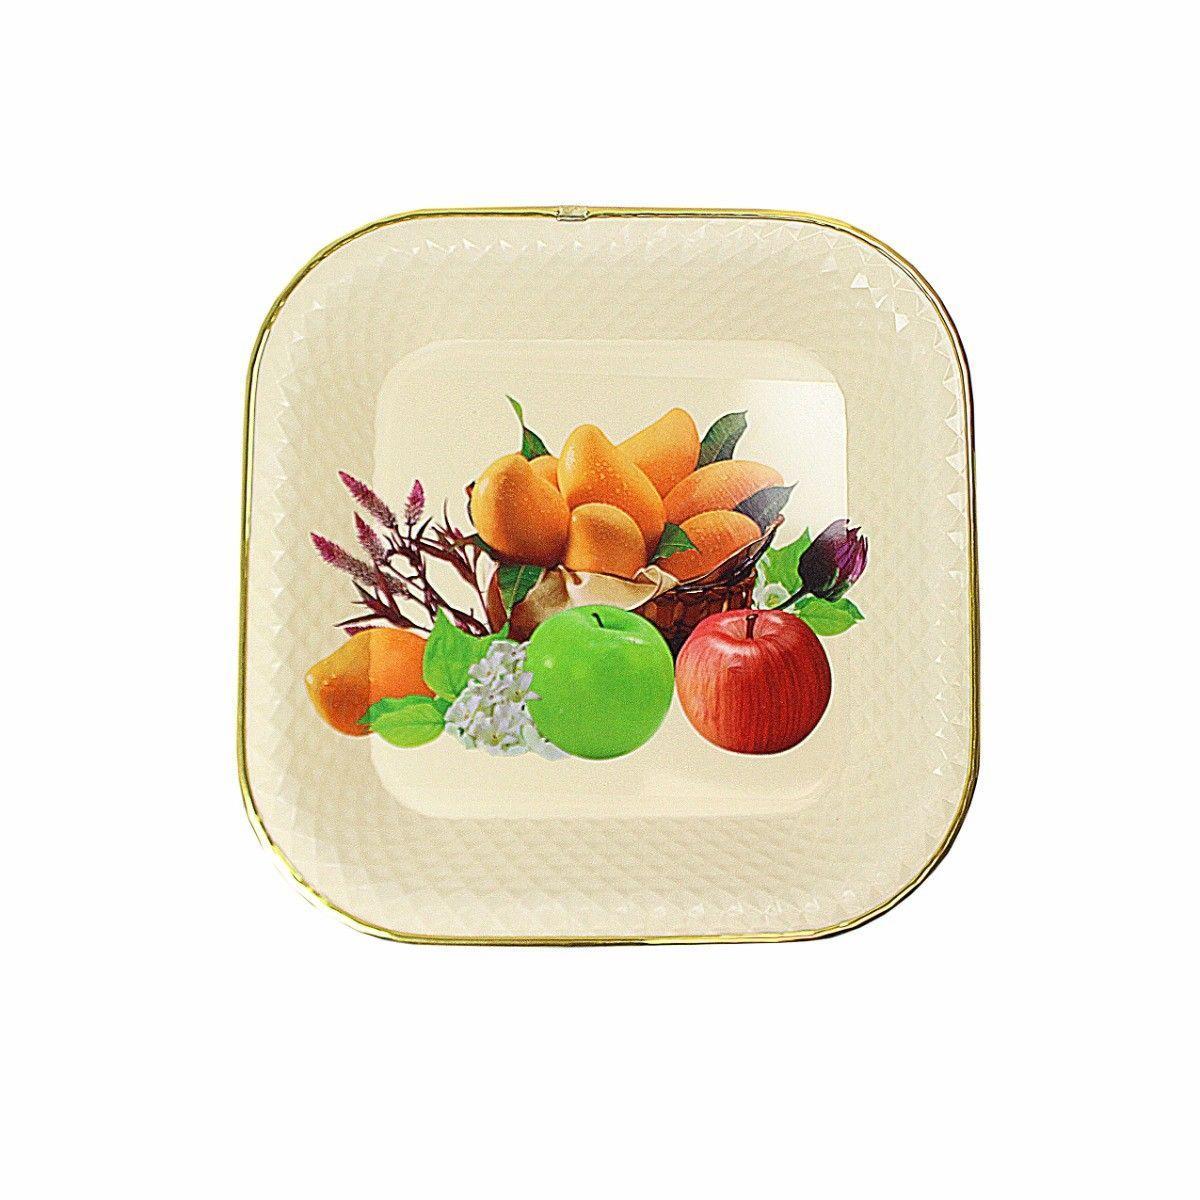 Square Plastic Serving Tray Plate Rattan Style with Floral Fruit Print 30cm Assorted Designs 4887 (Parcel Rate)